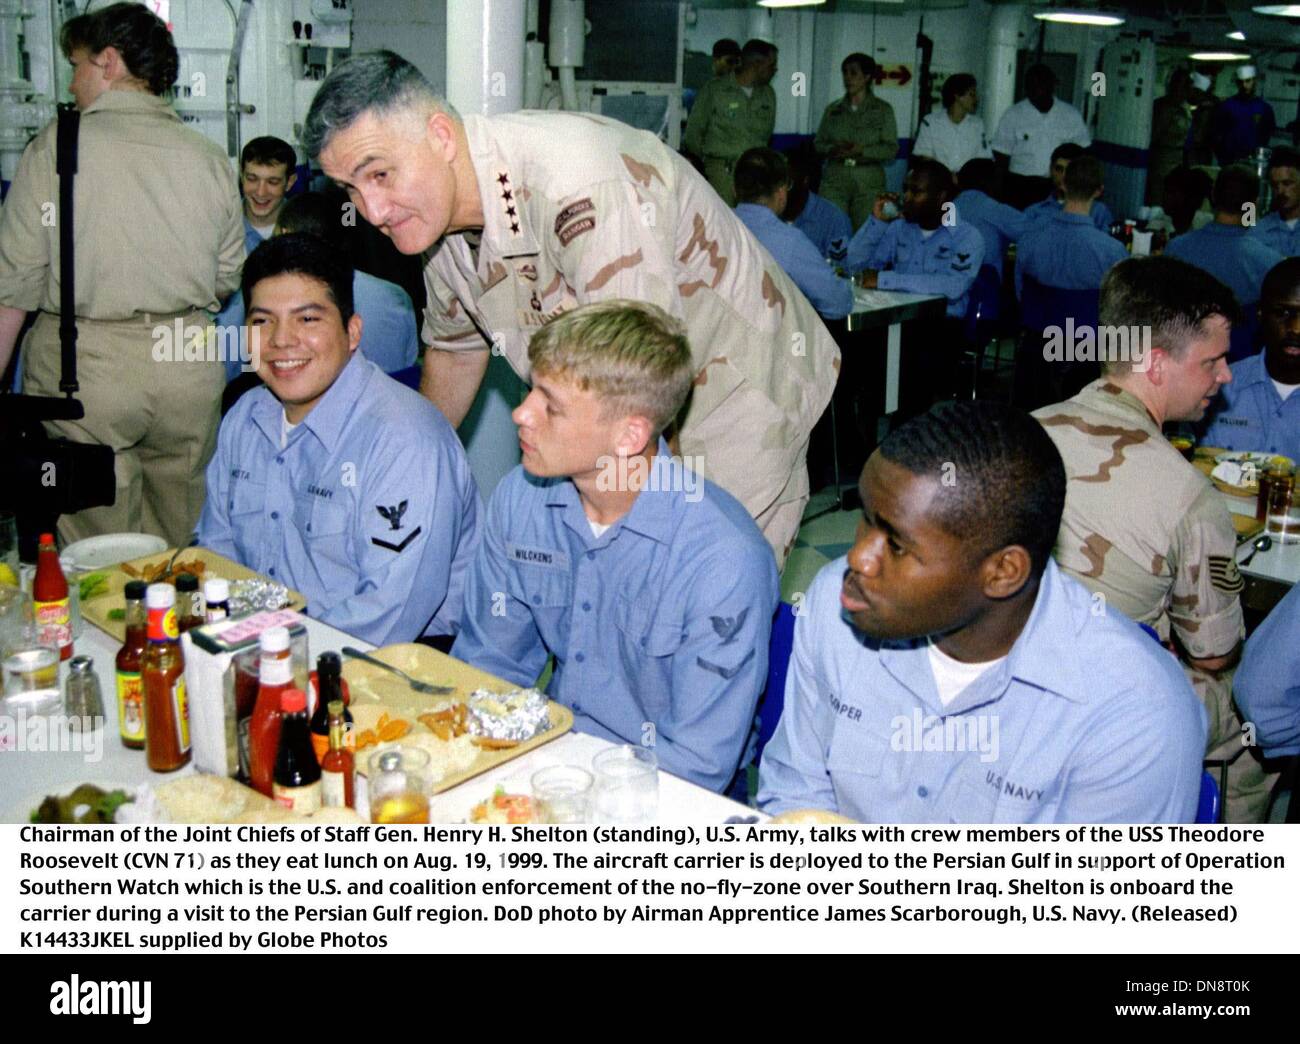 Aug. 19, 1999 - 990819-N-2003S-002..Chairman of the Joint Chiefs of Staff Gen. Henry H. Shelton (standing), U.S. Army, talks with crew members of the USS Theodore Roosevelt (CVN 71) as they eat lunch on Aug. 19, 1999.  The aircraft carrier is deployed to the Persian Gulf in support of Operation Southern Watch which is the U.S. and coalition enforcement of the no-fly-zone over South Stock Photo